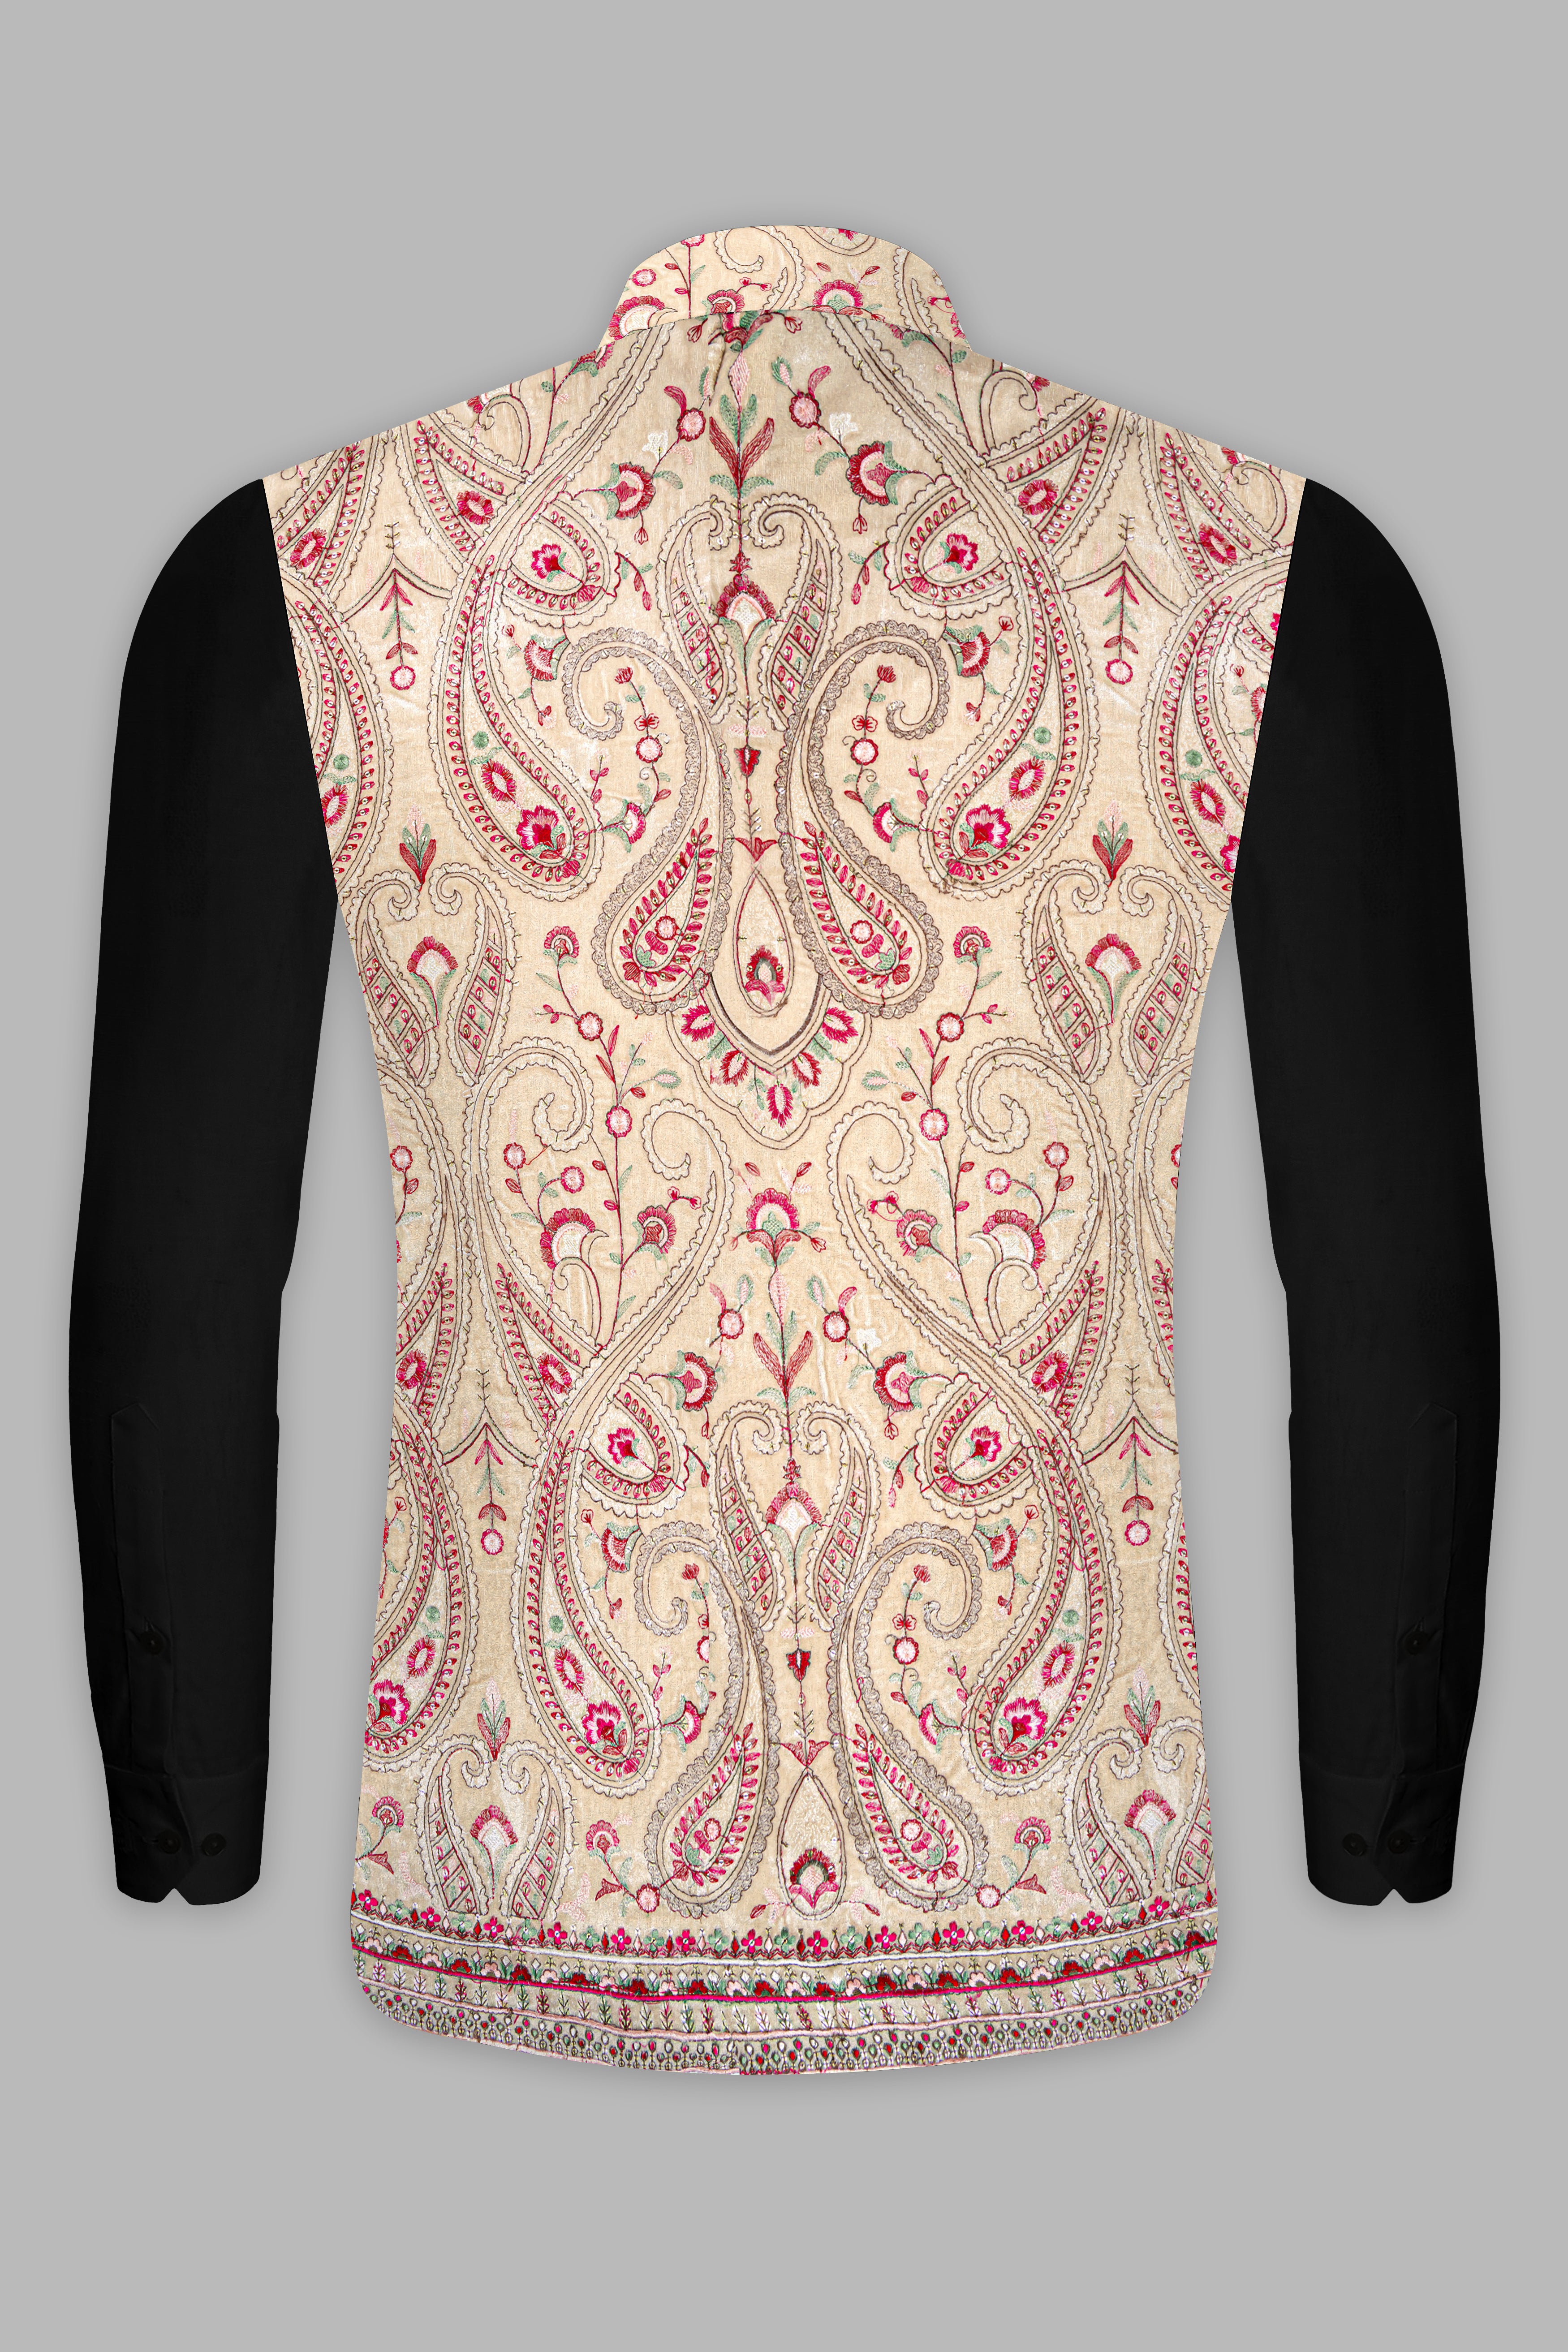 Bisque Brown and Cardinal Pink Floral Thread Embroidered Nehru Jacket WC3504-36,  WC3504-38,  WC3504-40,  WC3504-42,  WC3504-44,  WC3504-46,  WC3504-48,  WC3504-50,  WC3504-52,  WC3504-54,  WC3504-56,  WC3504-58,  WC3504-60